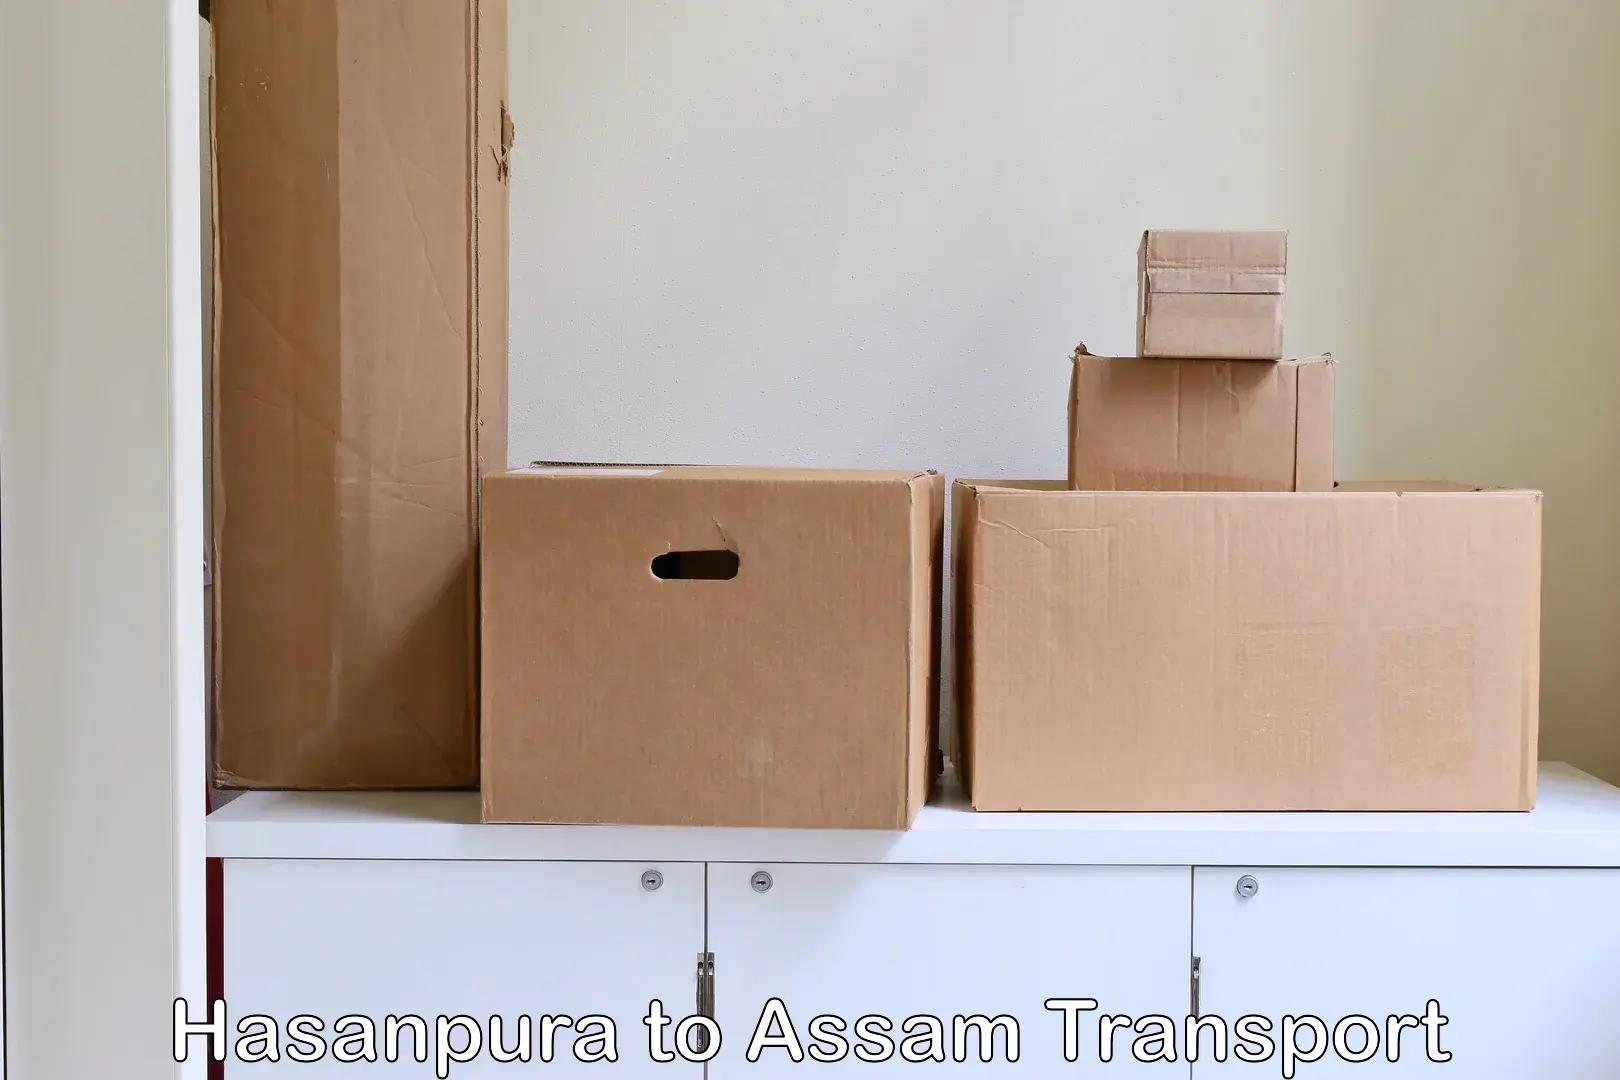 Commercial transport service Hasanpura to Assam